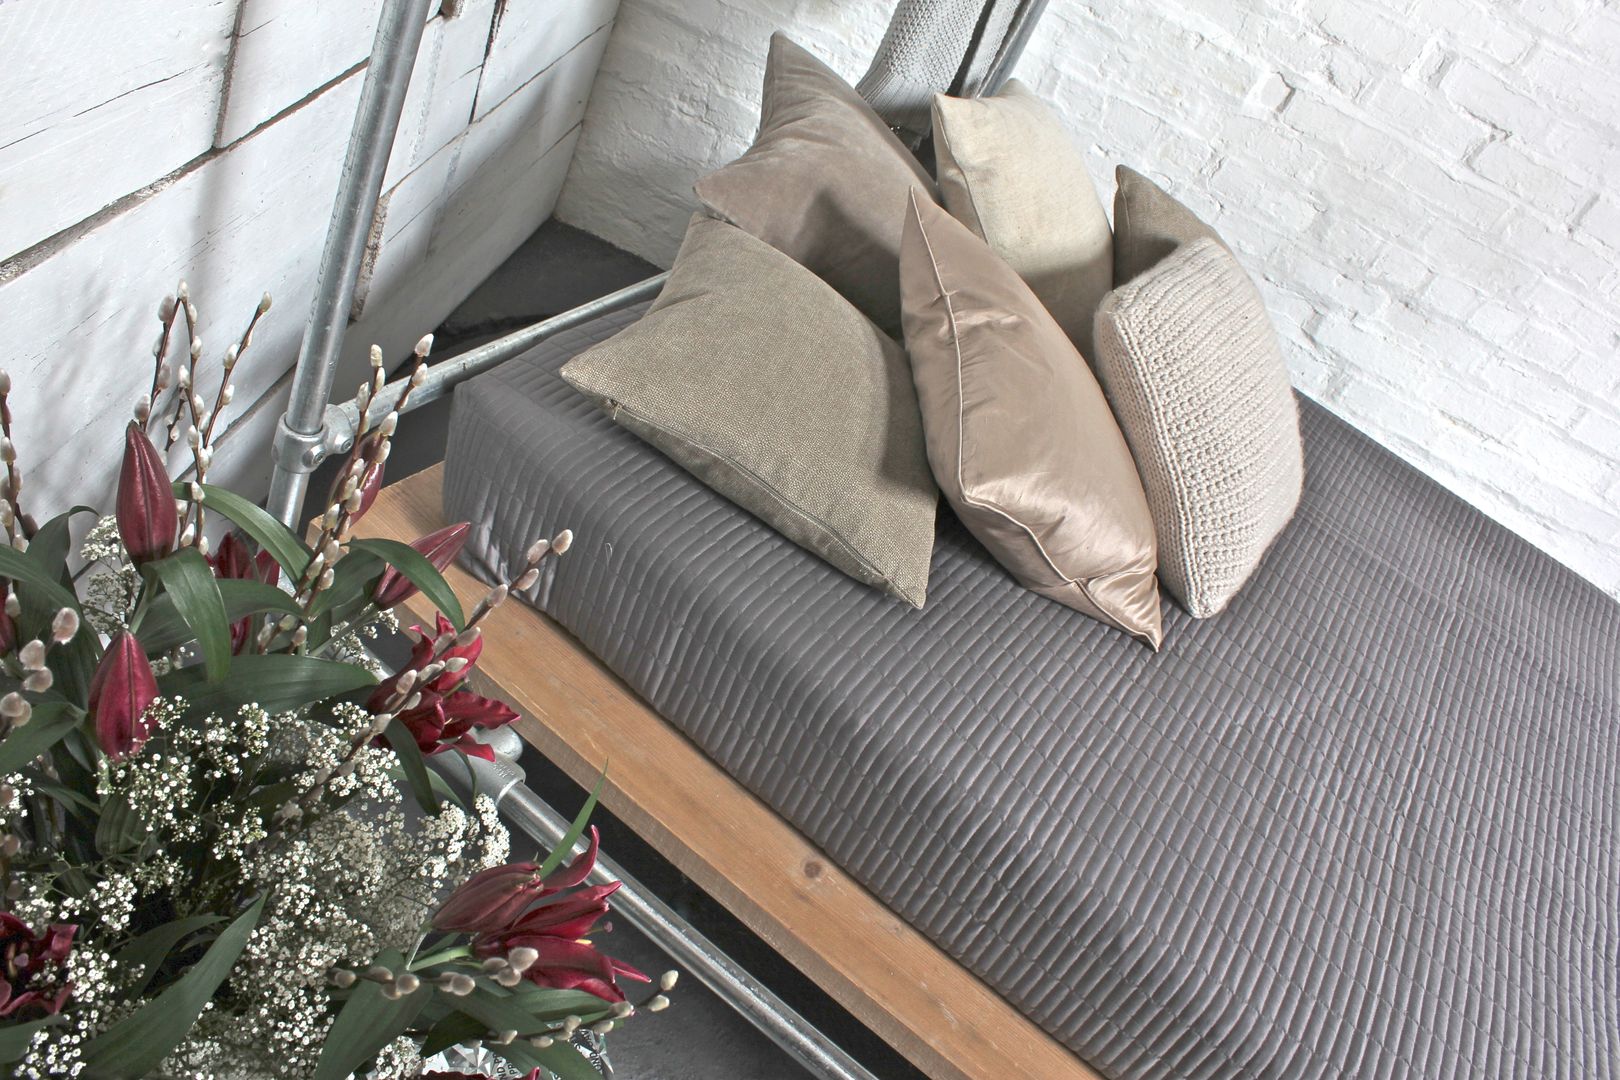 Galvanised Steel Pipe and Reclaimed Scaffolding Board Kingsize Bed - Bespoke Urban Furniture by www.inspiritdeco.com homify Modern style bedroom Beds & headboards